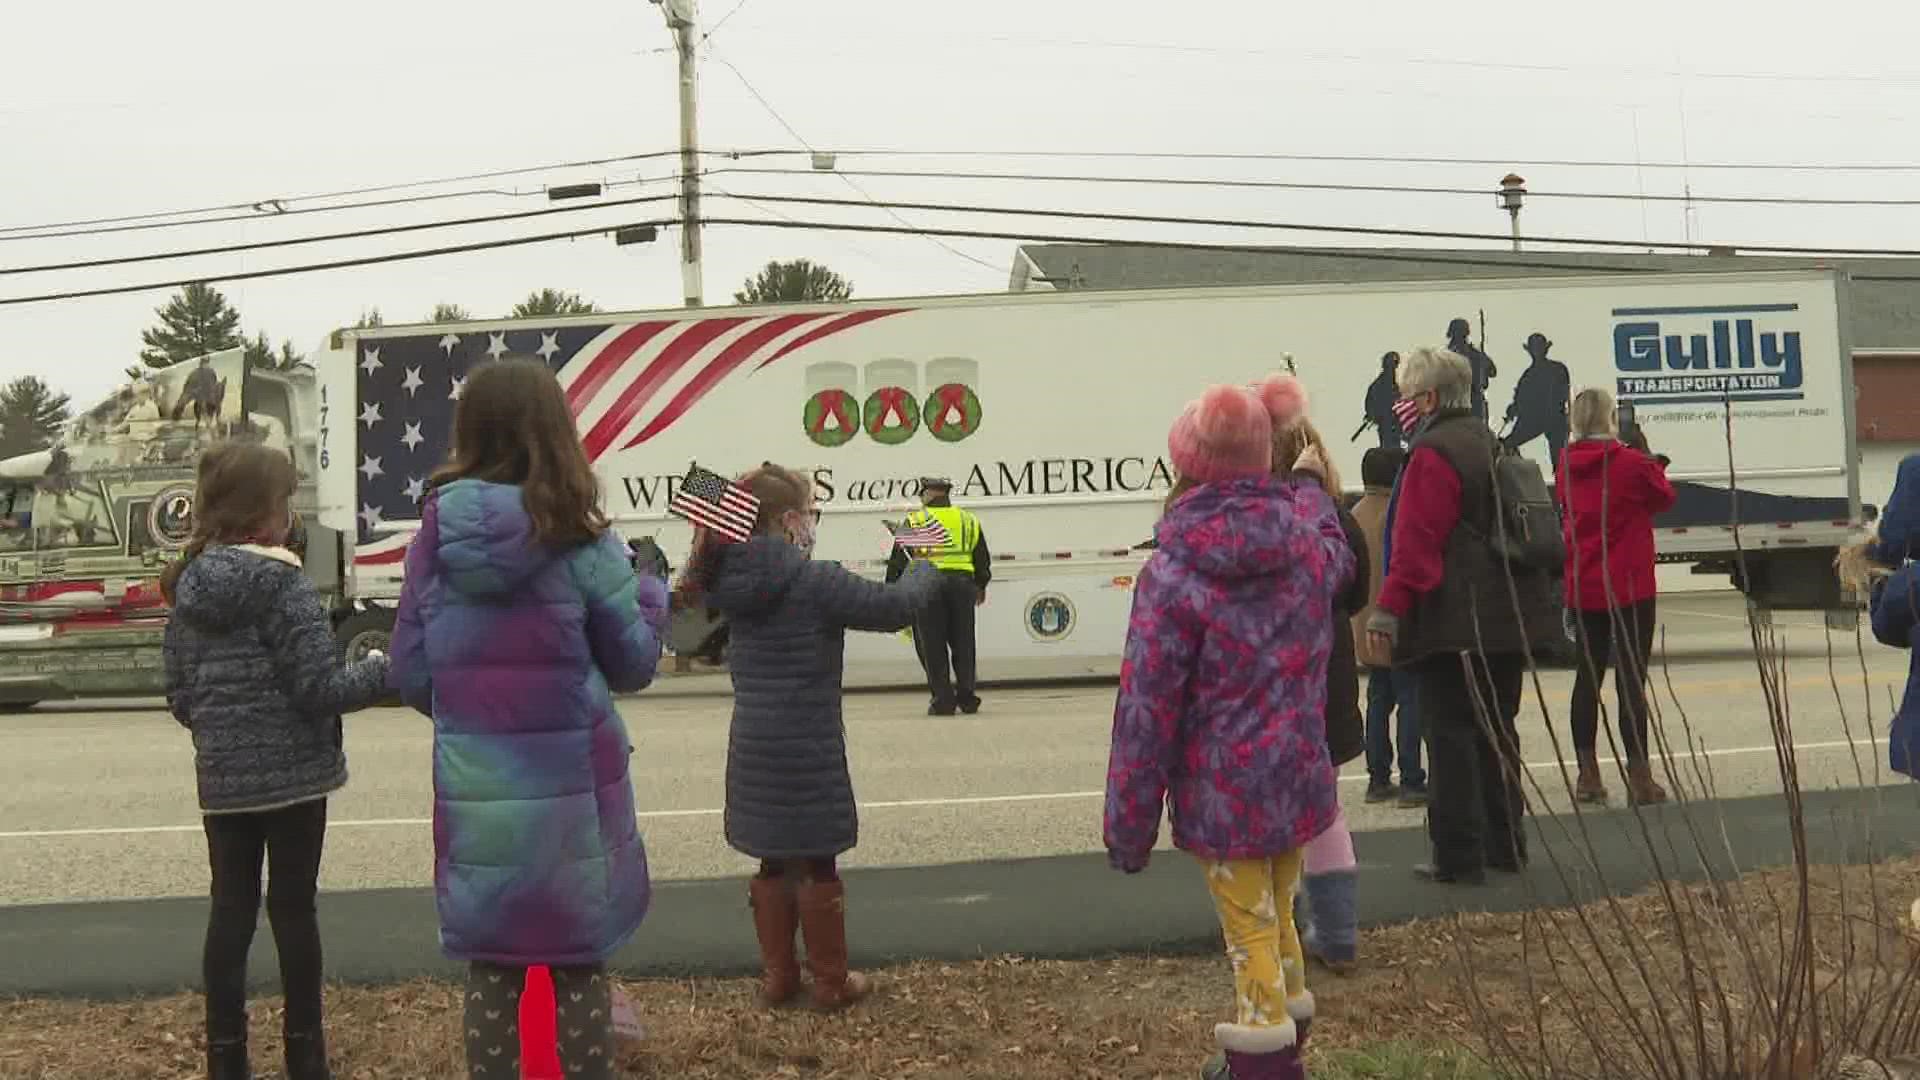 For the first time, the convoy stopped in Eliot before crossing the border into New Hampshire.